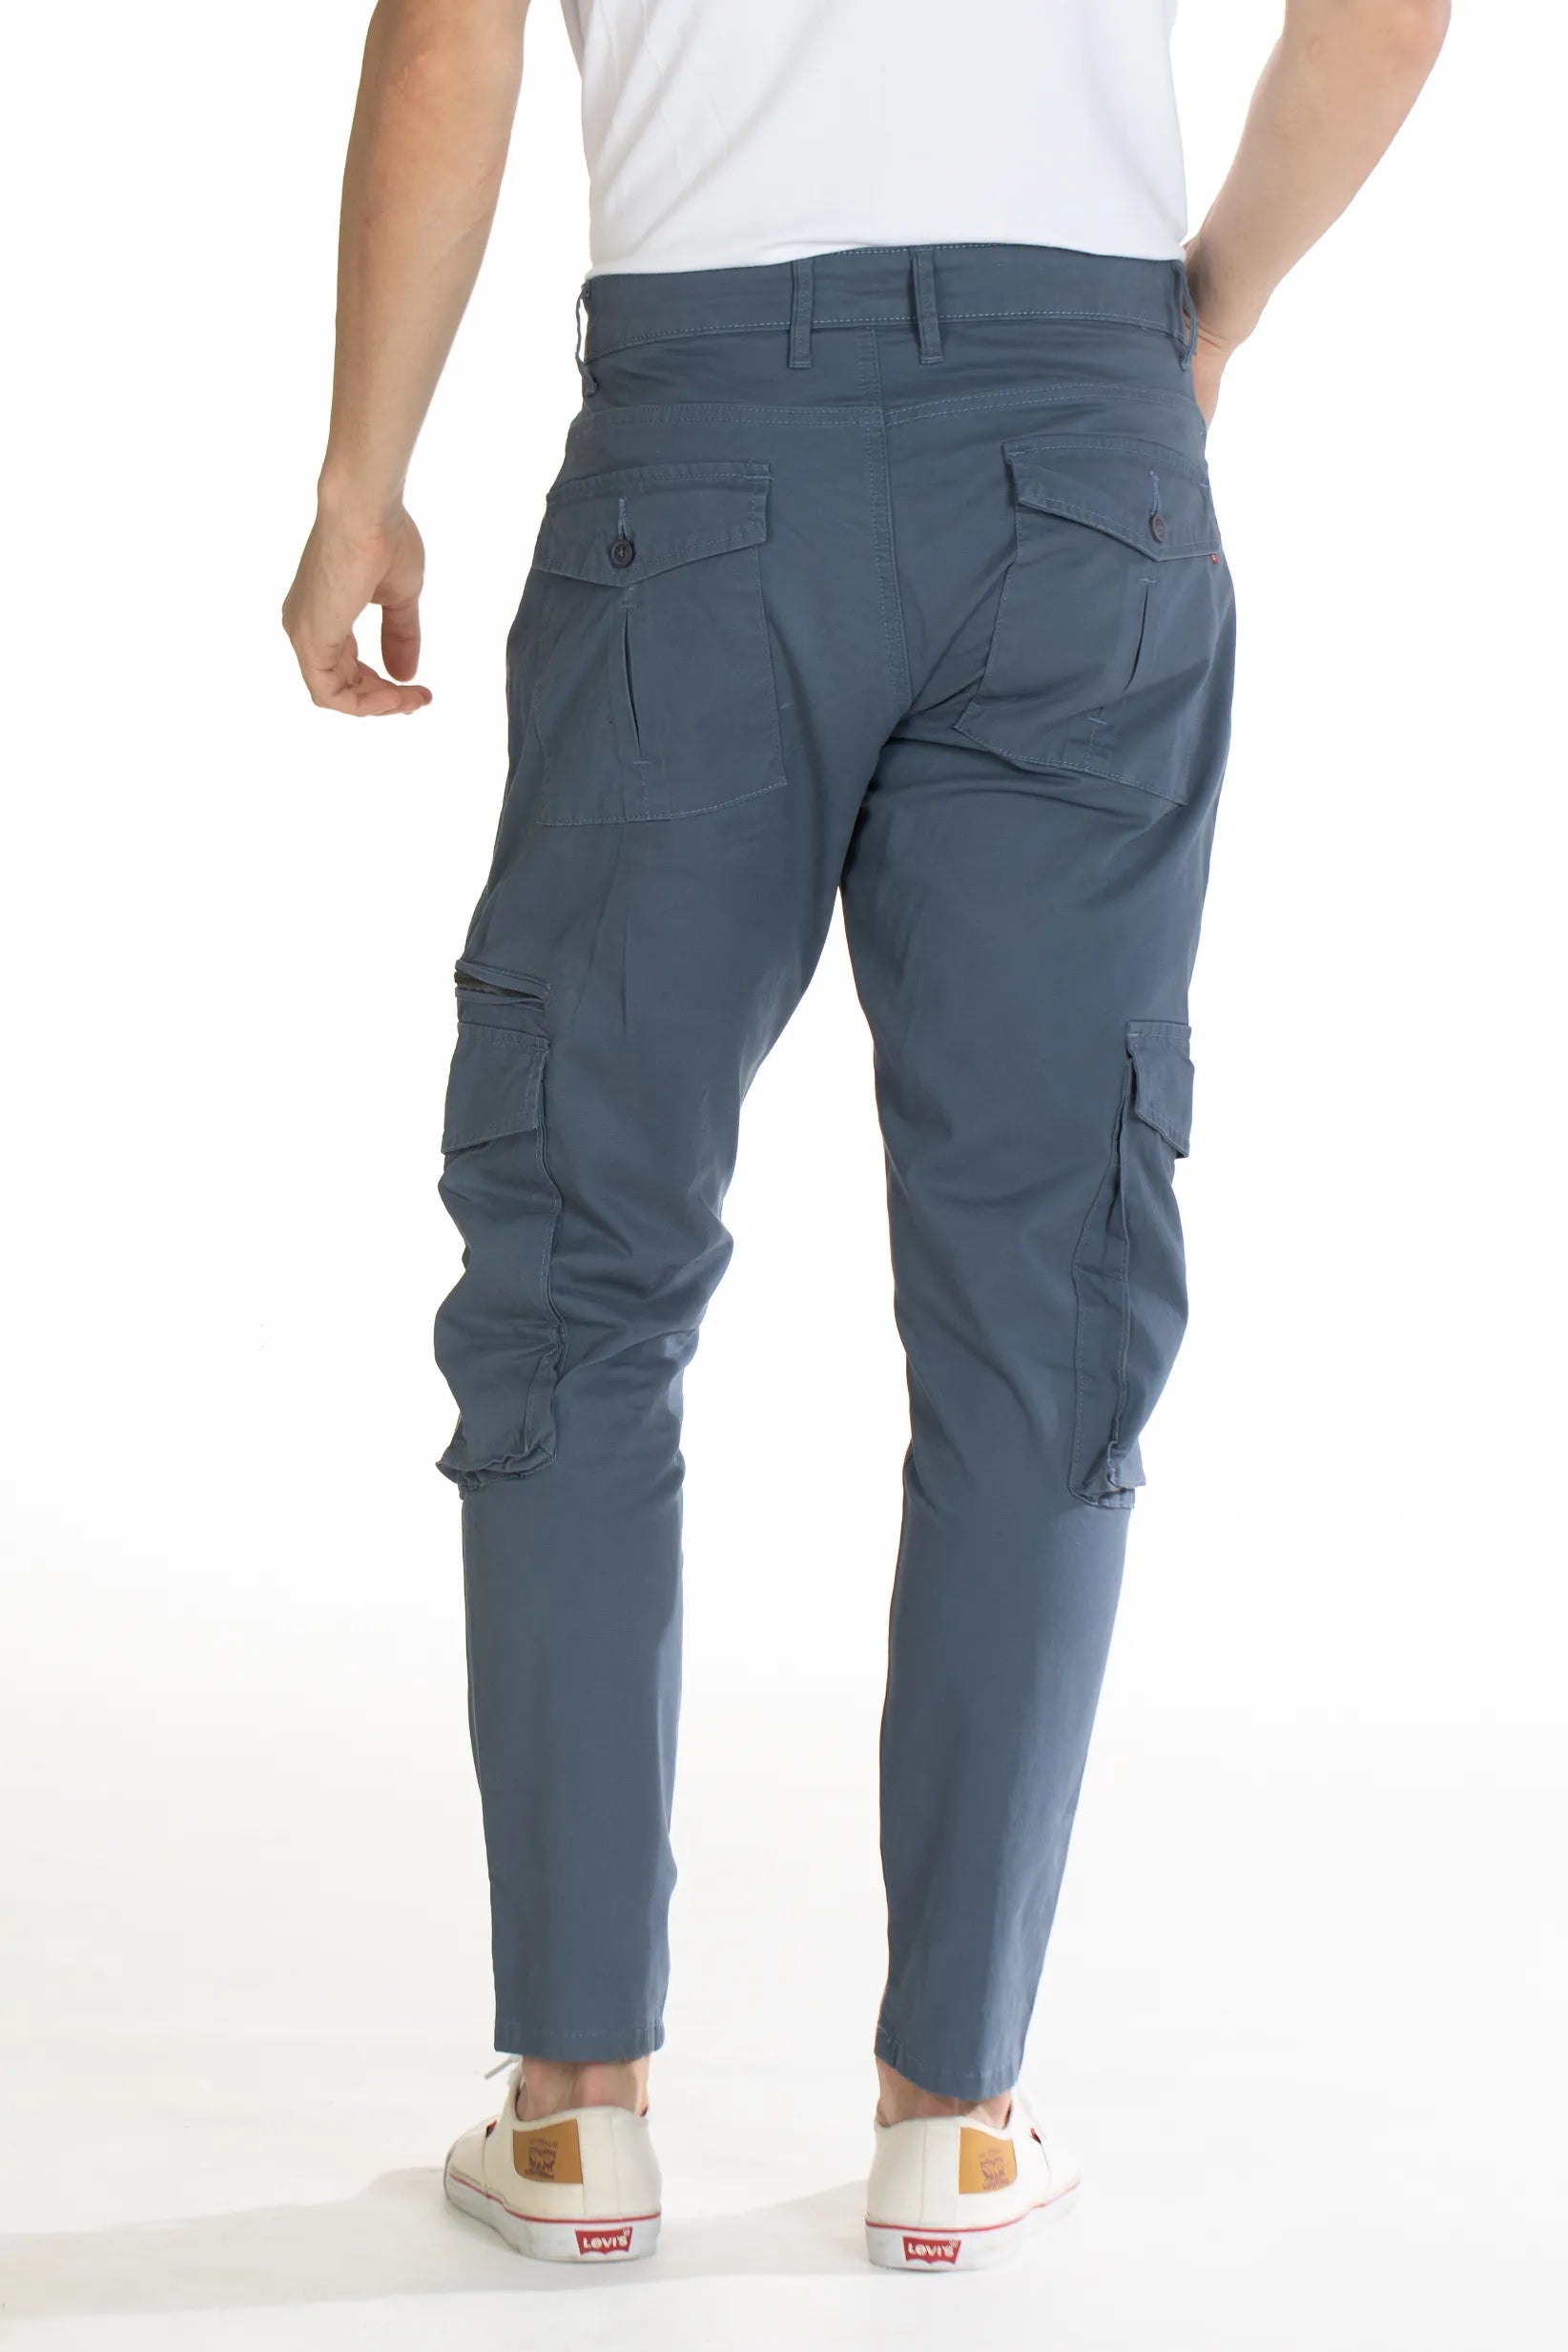 Kinghua Mens Baggy Cargo Pants Casual Loose Fit India  Ubuy